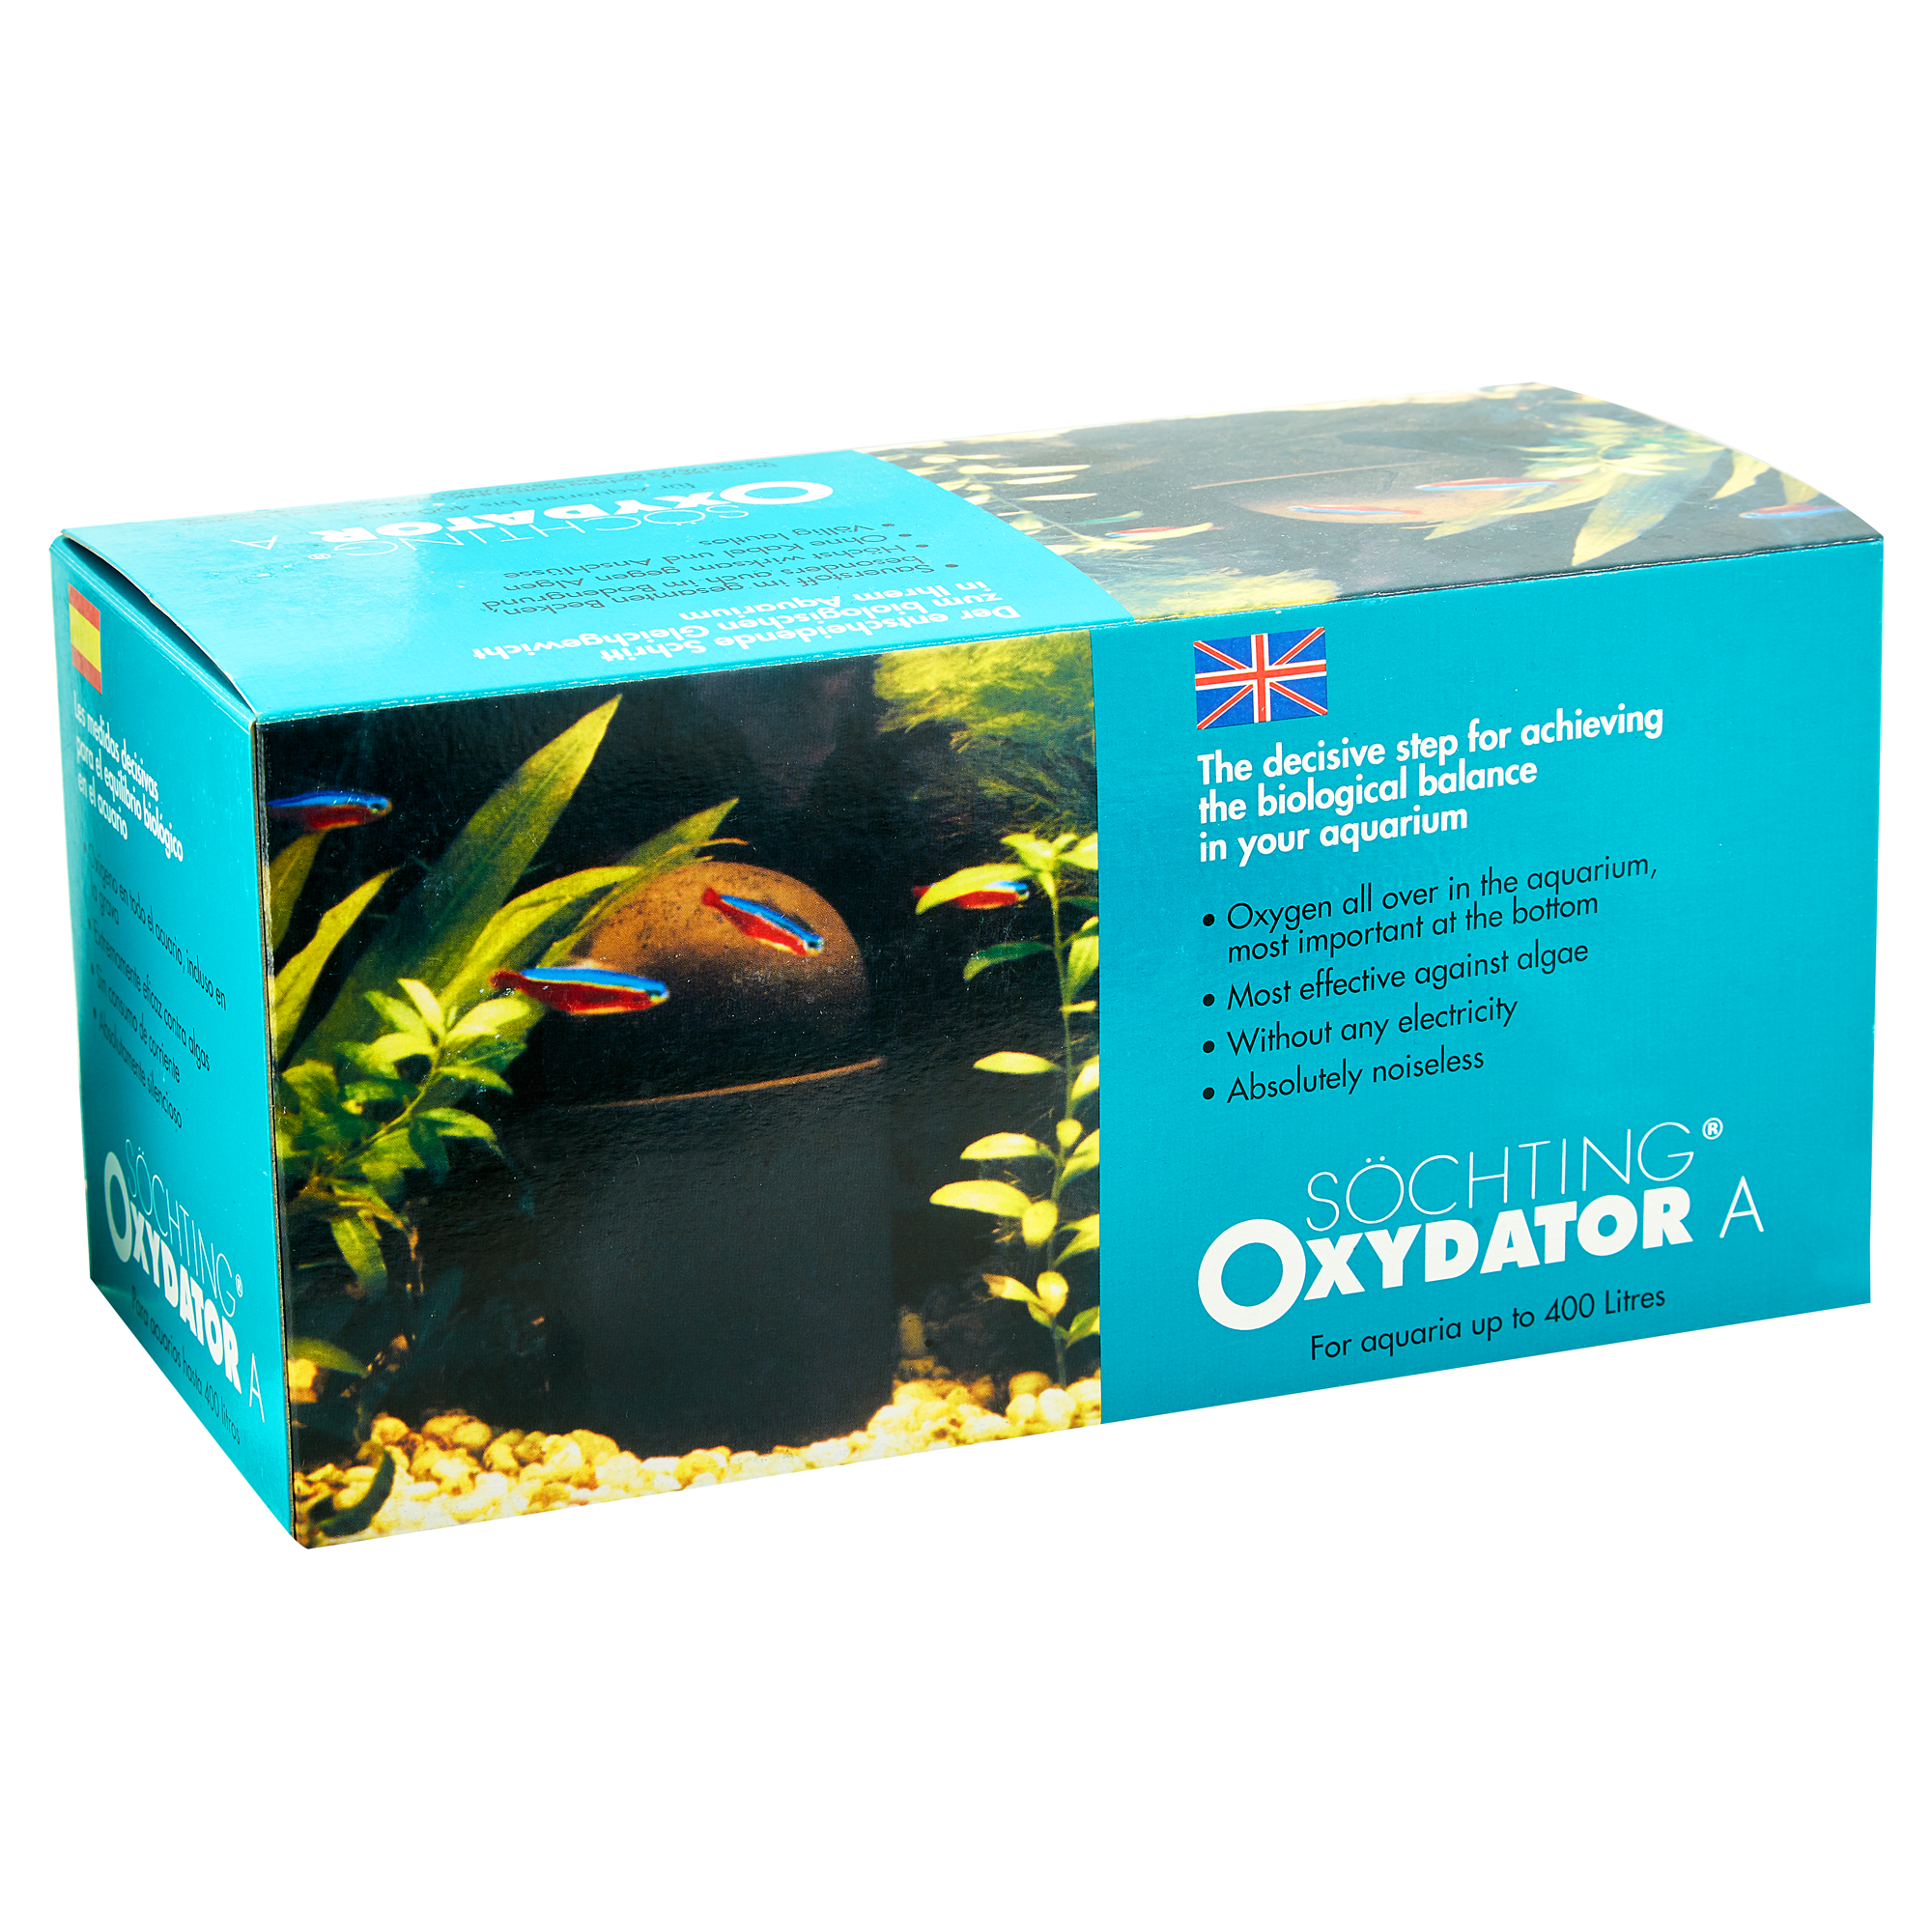 Oxydator A + product picture